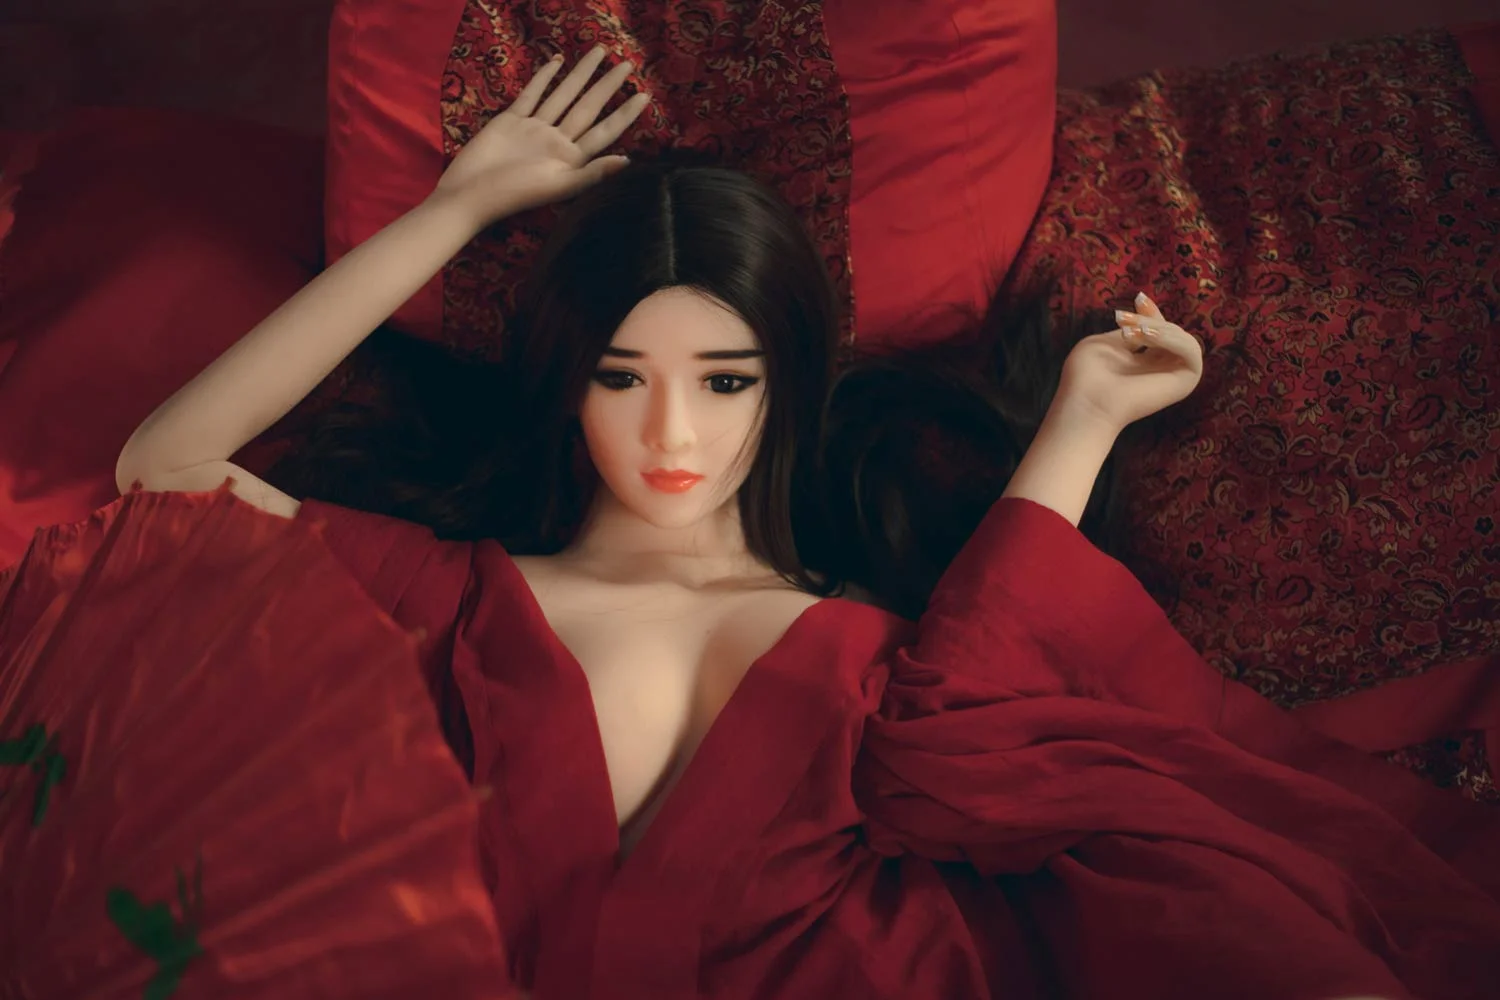 Sex doll with hands on pillows